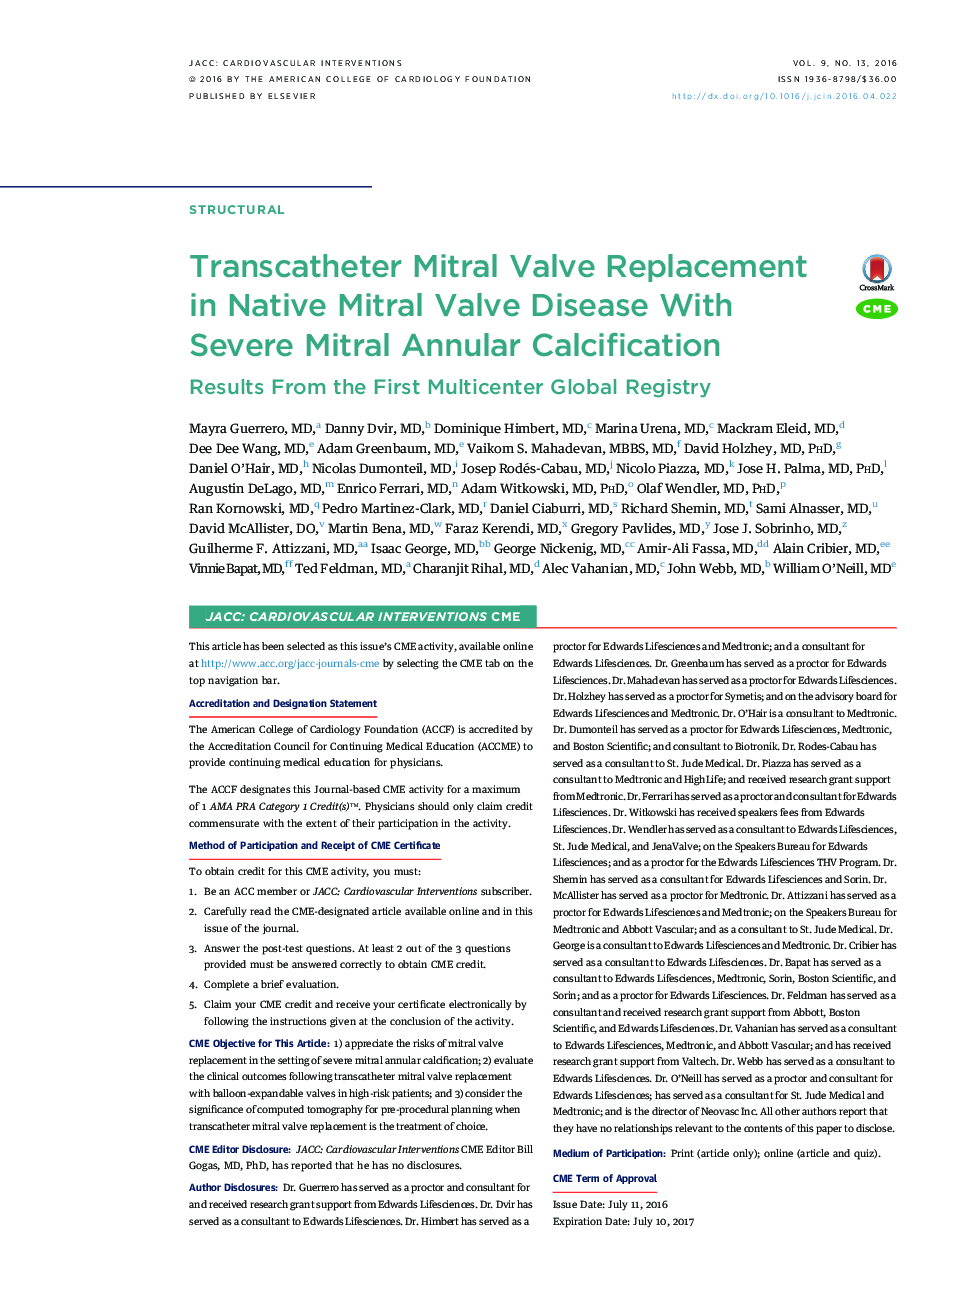 Transcatheter Mitral Valve Replacement in Native Mitral Valve Disease With Severe Mitral Annular Calcification : Results From the First Multicenter Global Registry